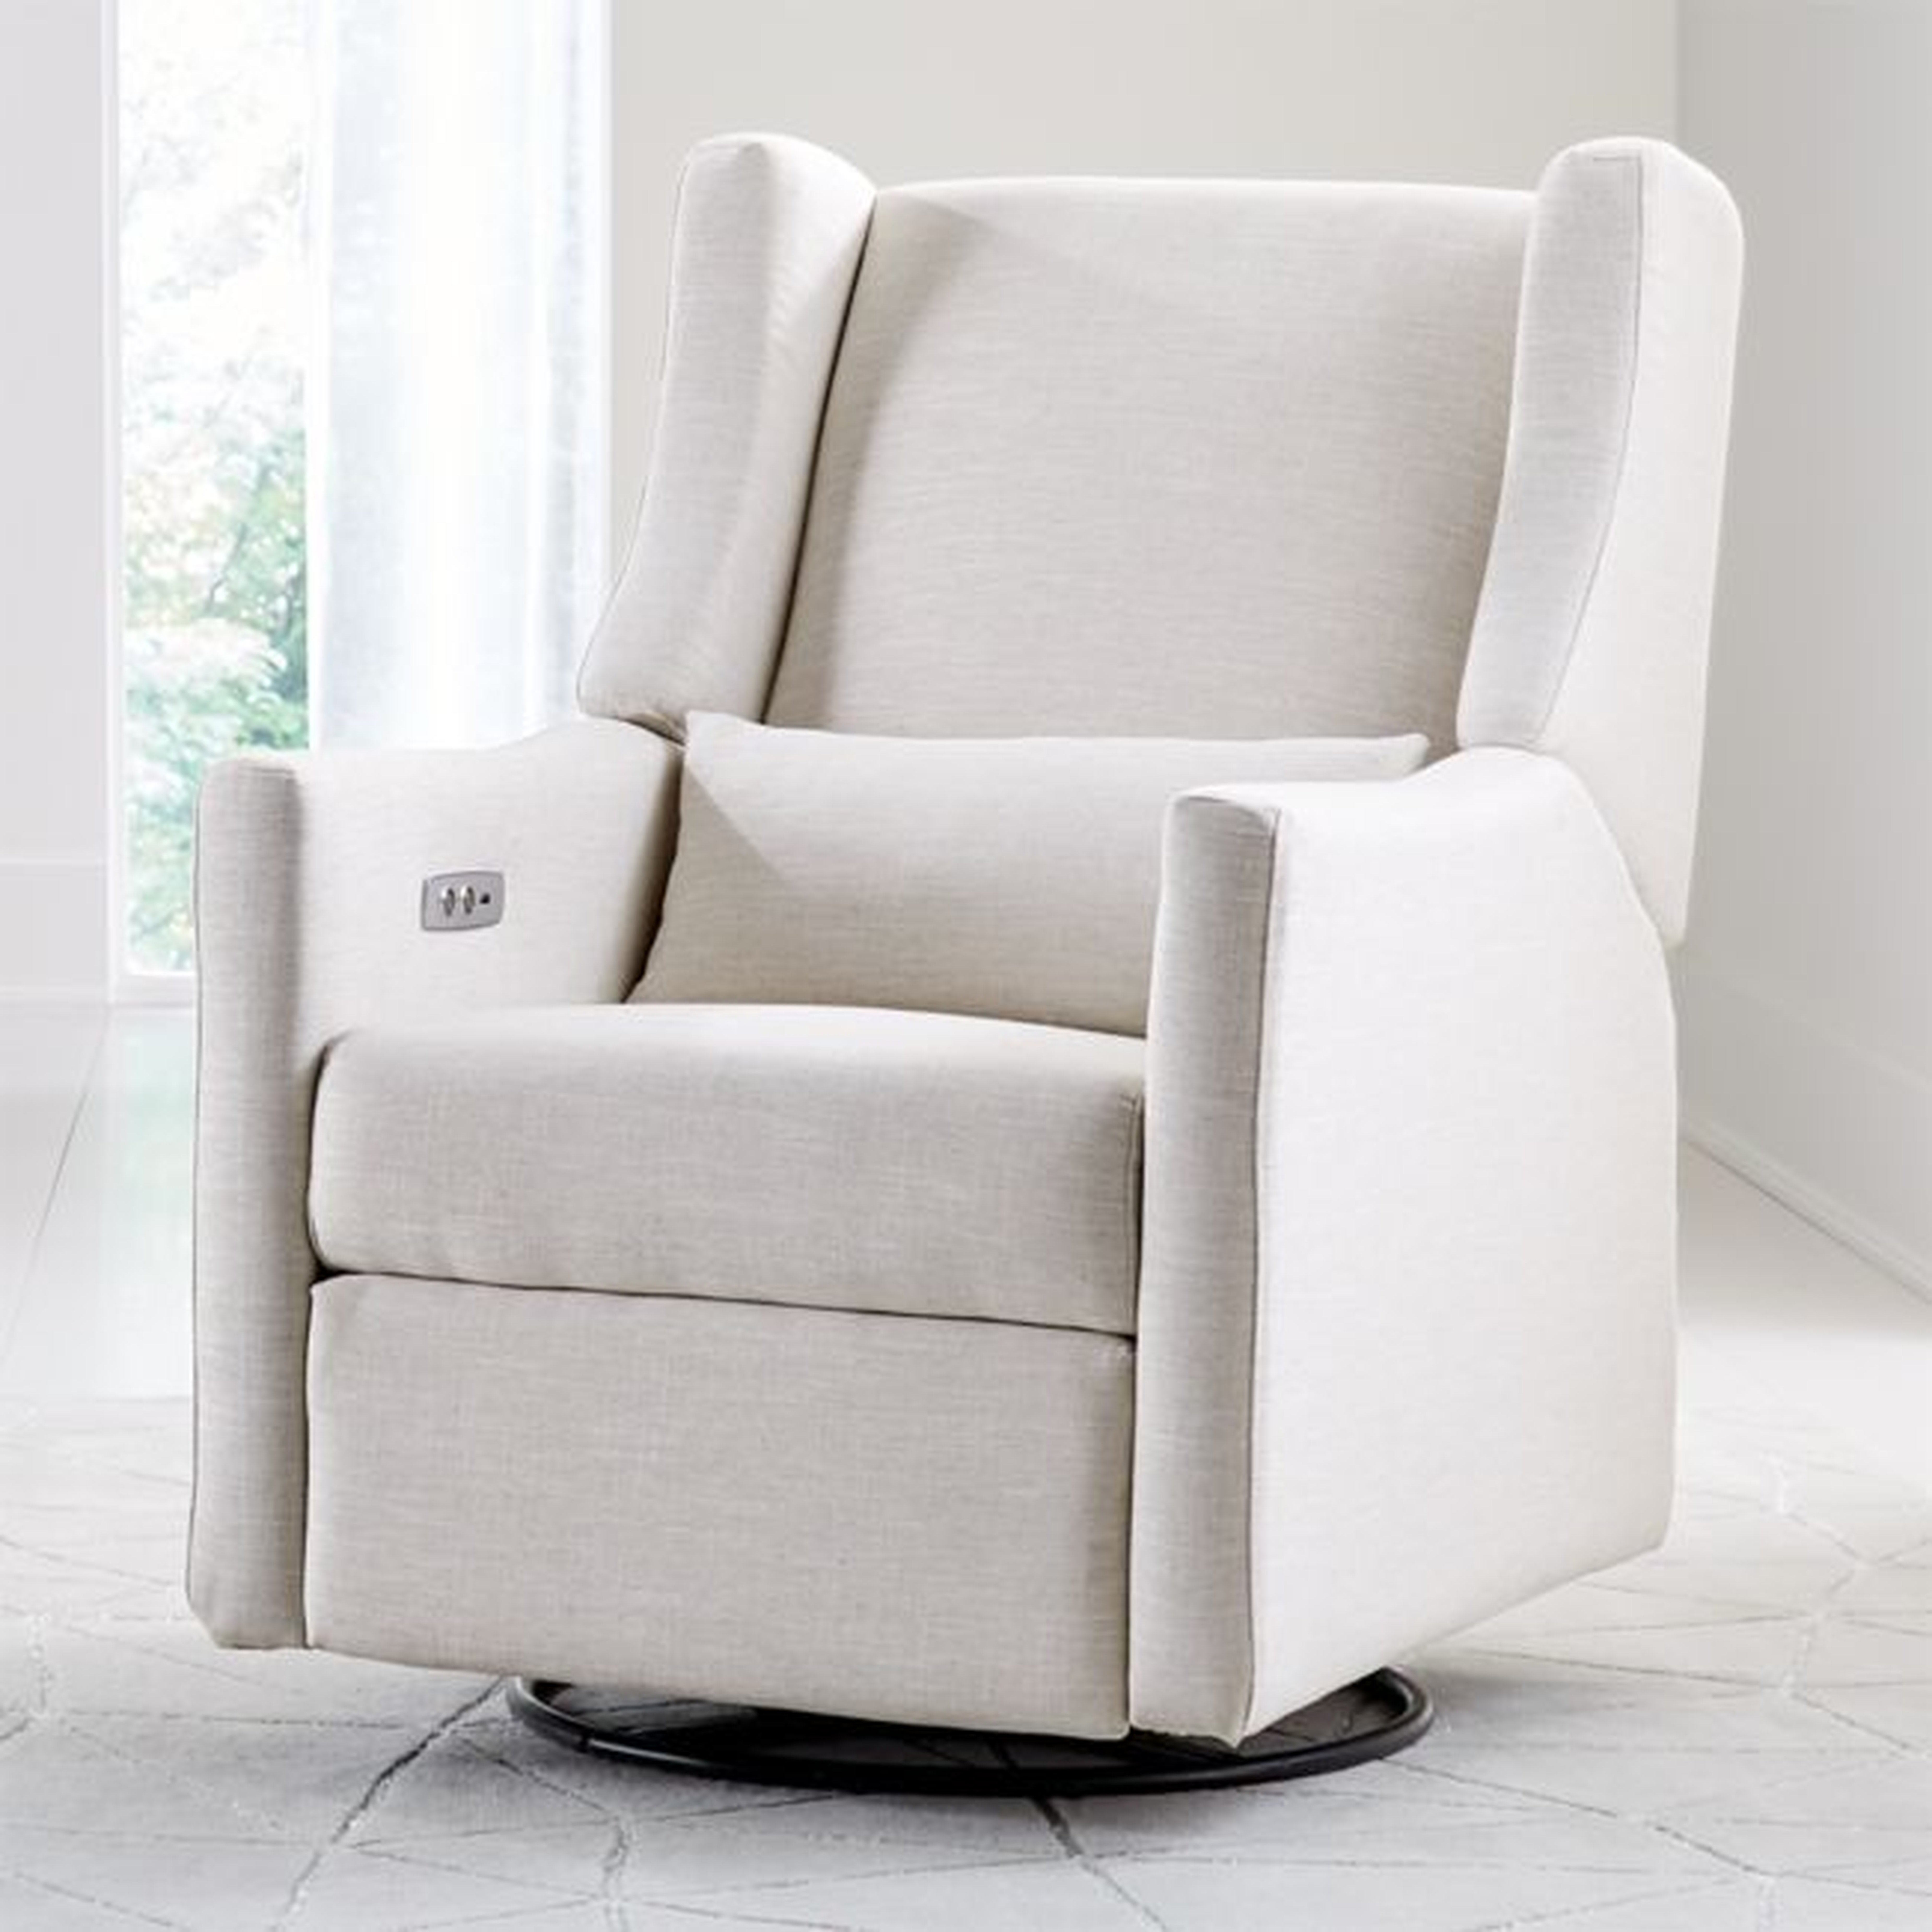 Babyletto Kiwi Ivory Power Recliner Glider - Crate and Barrel